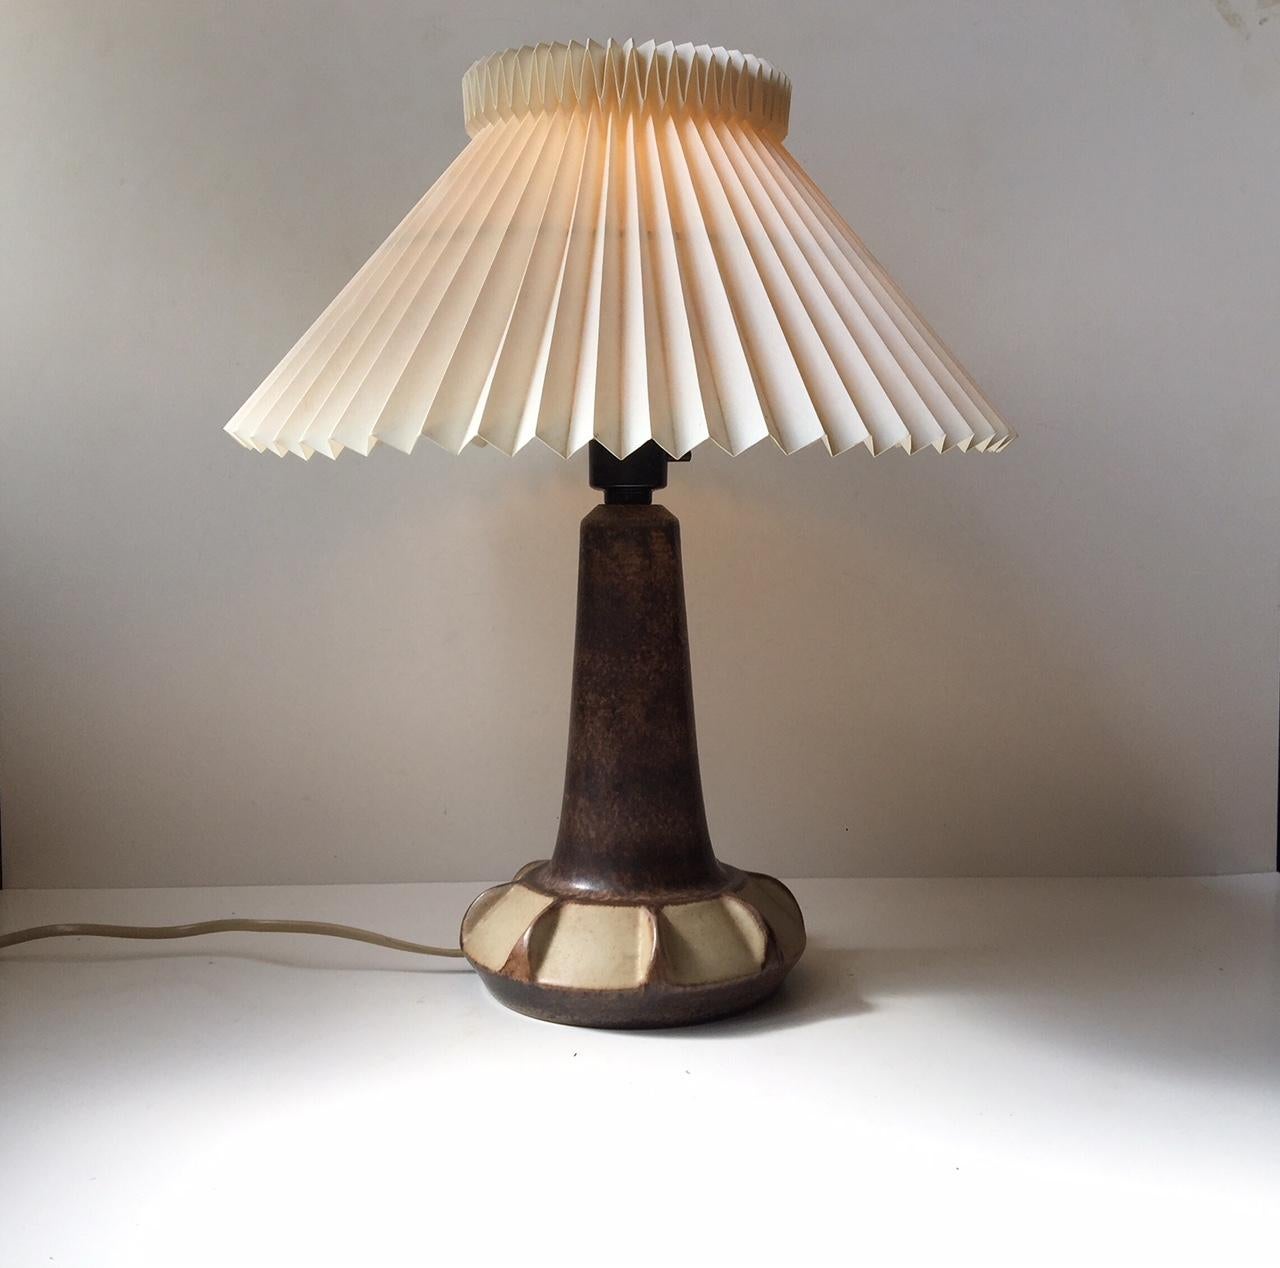 This ceramic table lamp is in earthy brown and pastel glazes. This design was executed at Michael Andersen & Son in Denmark during the 1970s. The light features a pin-switch directly to the socket. The base is marked with both the marker's mark and